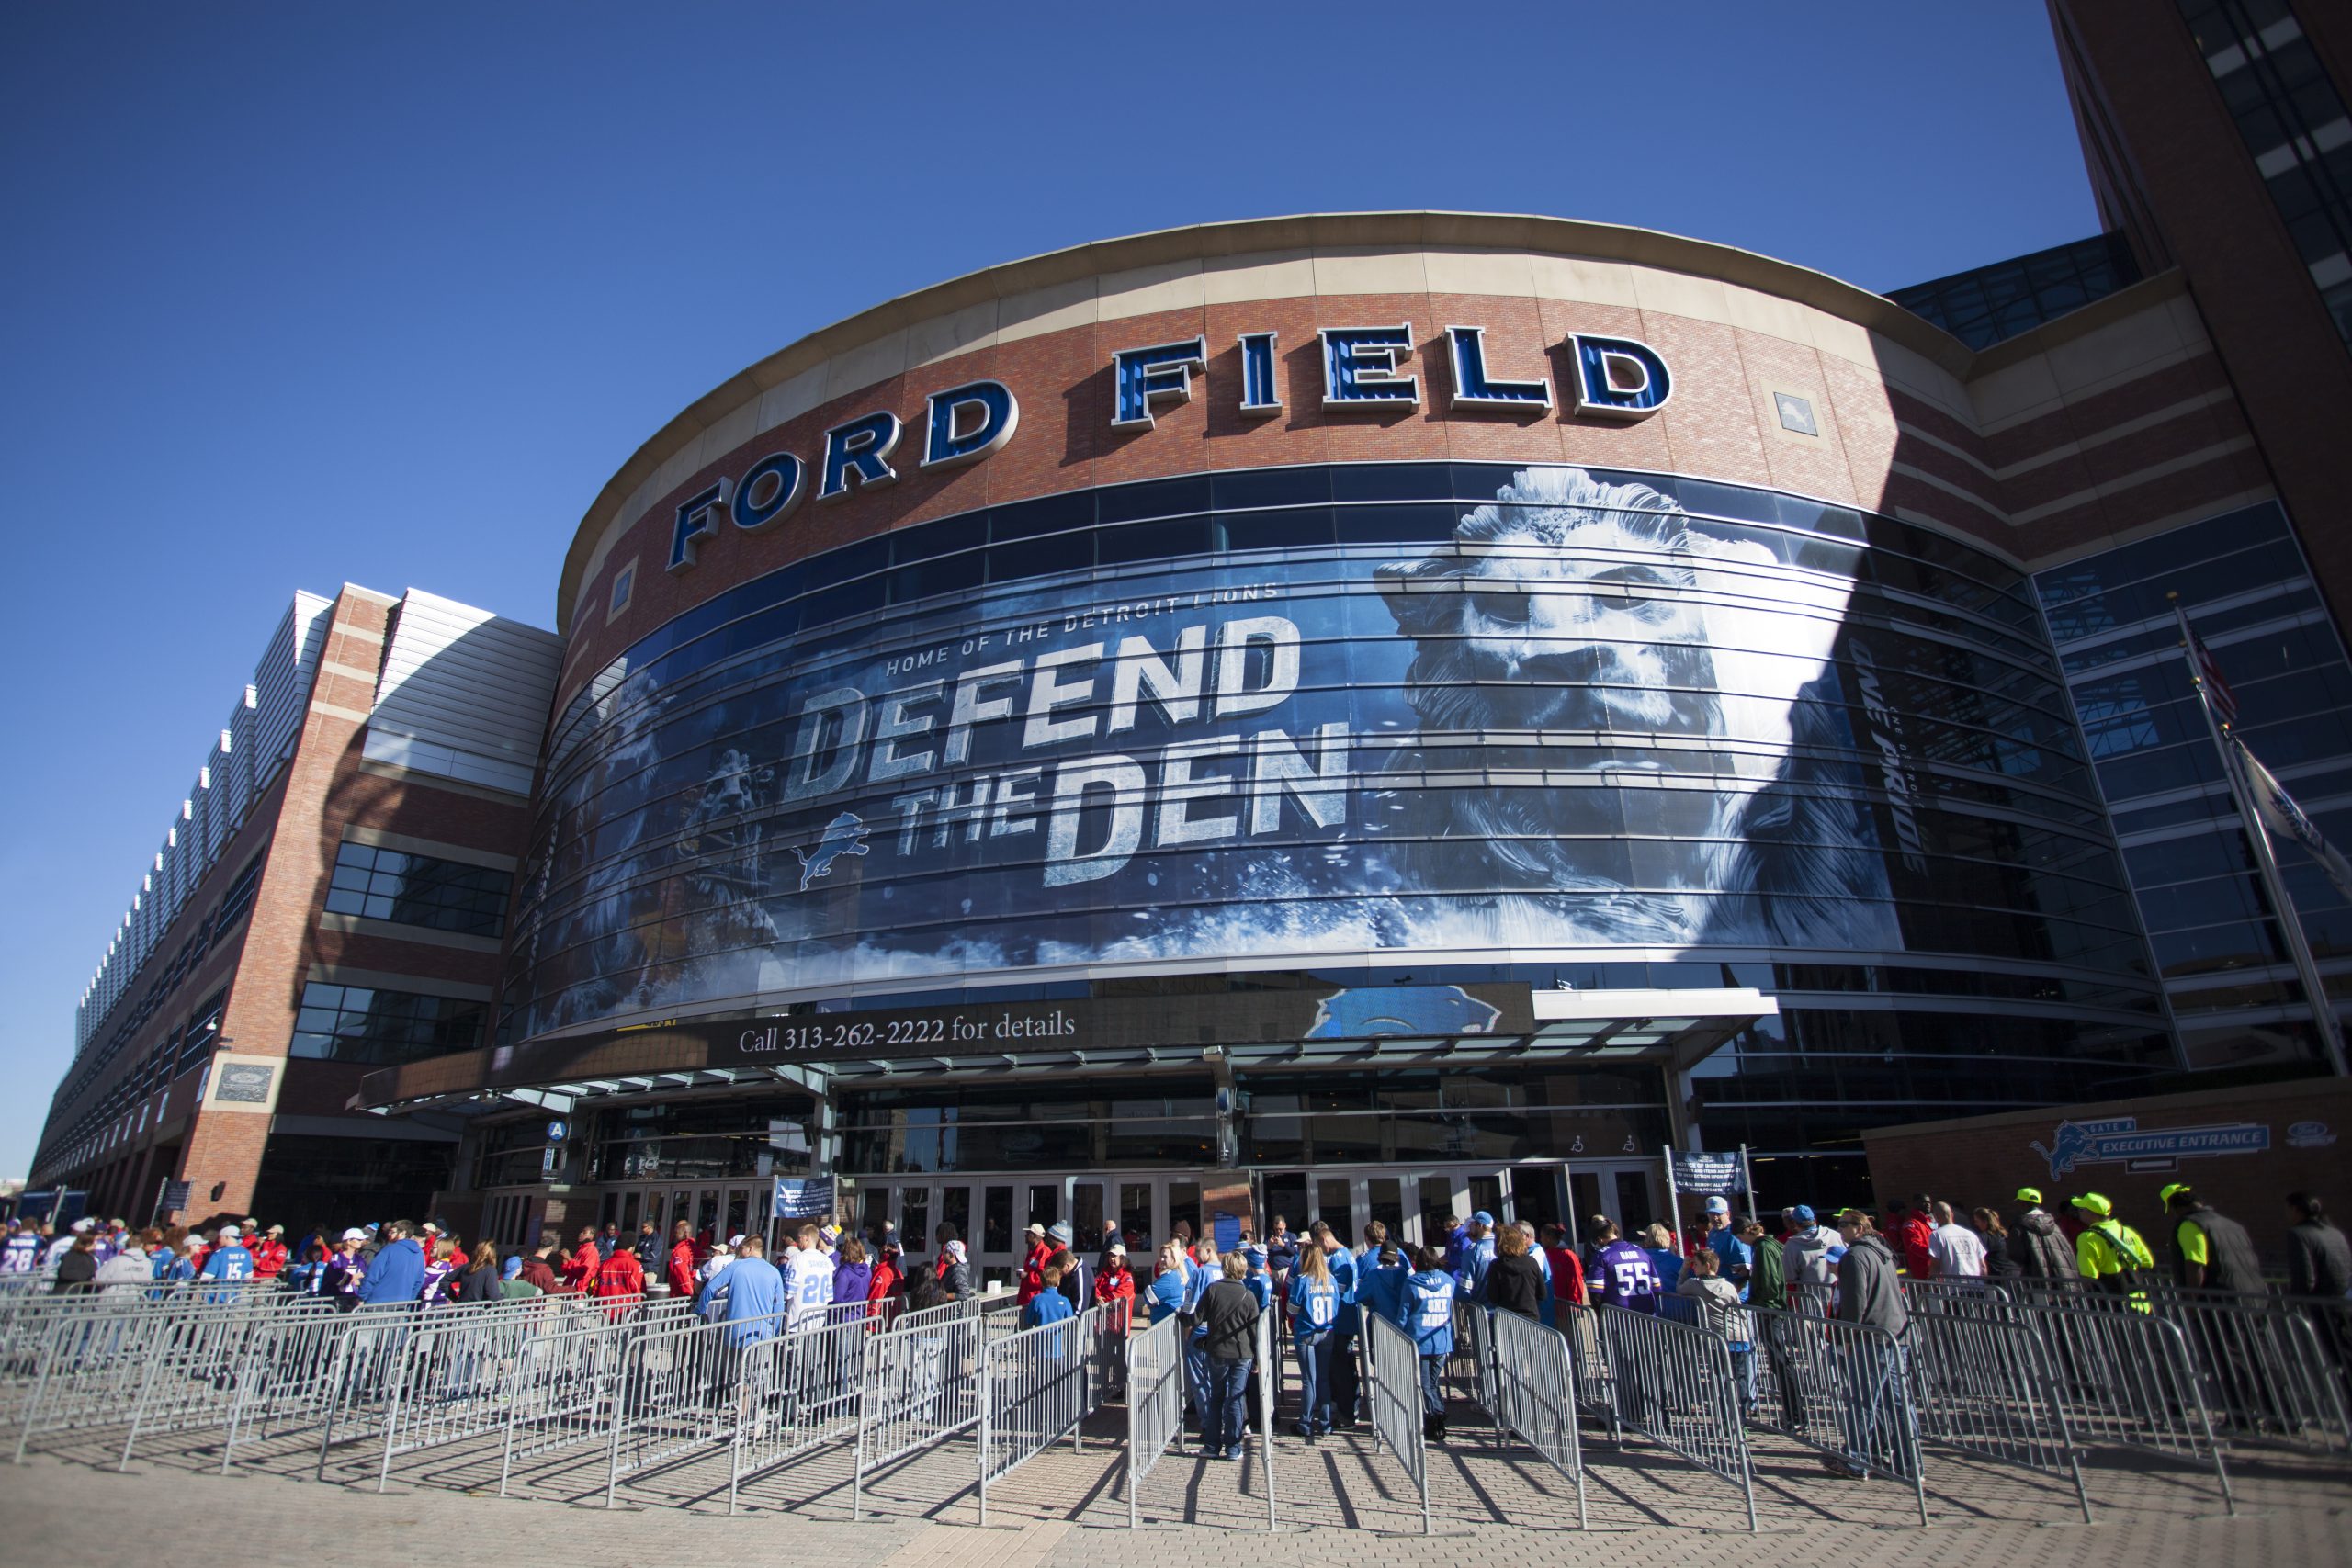 Detroit, MI, USA - October 25, 2015: A view of game day at Ford Field located in Detroit, Michigan. Ford Field is an indoor American football stadium and home to the Detroit Lions of the NFL.